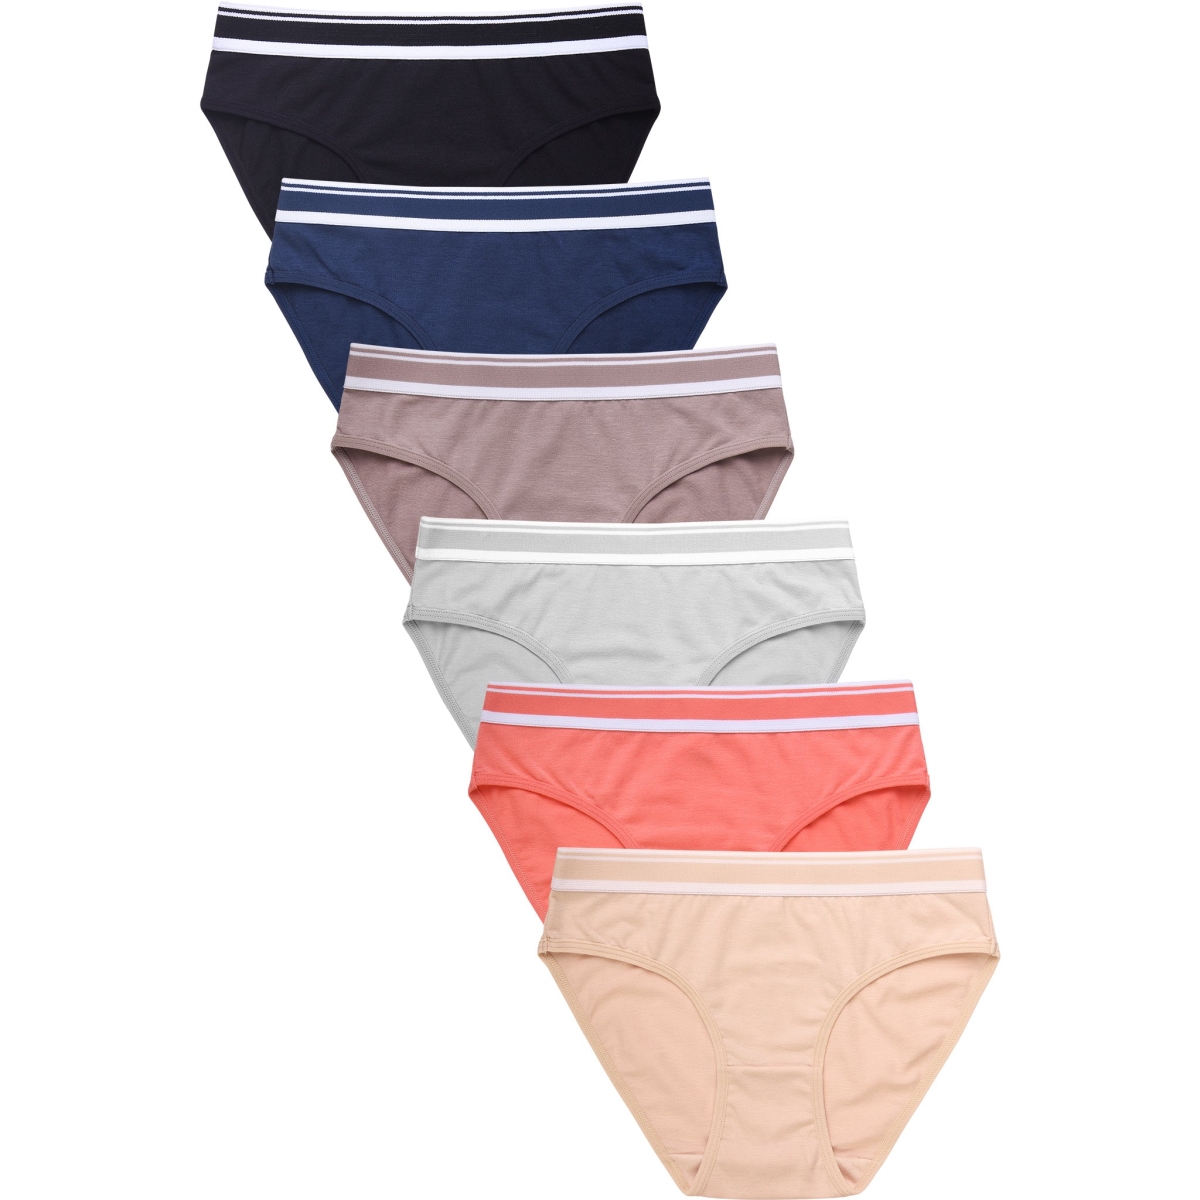 Picture of 247 Frenzy 247-LP1431CK4-LG Sofra Womens Essentials Cotton Stretch Bikini Panty Underwear - Assorted Color - Large - Pack of 6